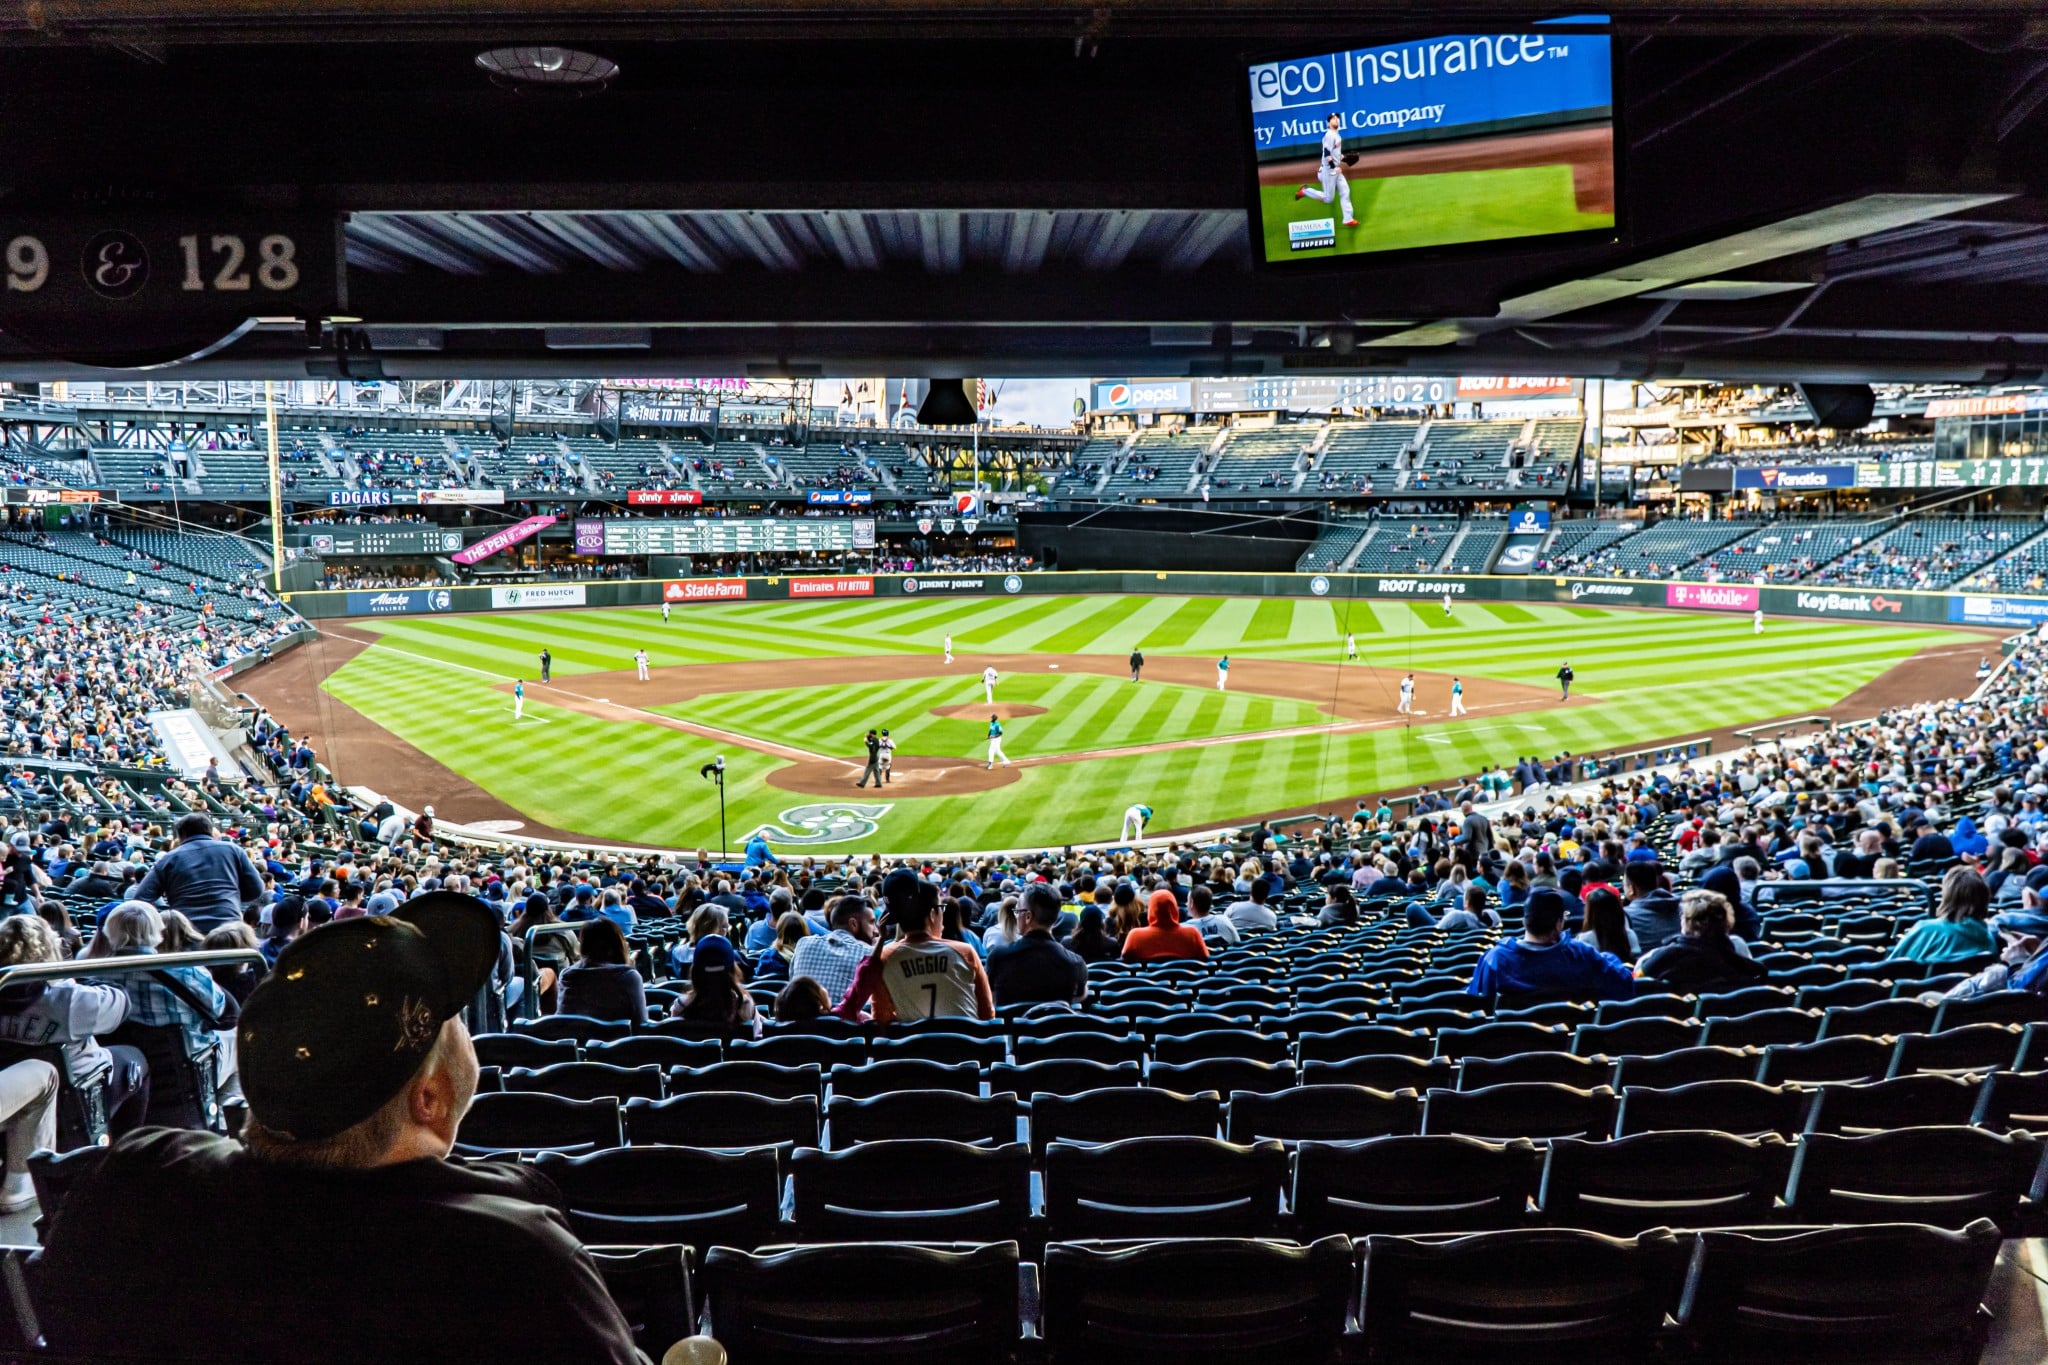 Seattle Software Developers | Seattle Mariners Off to HOT Start | seattle mariners